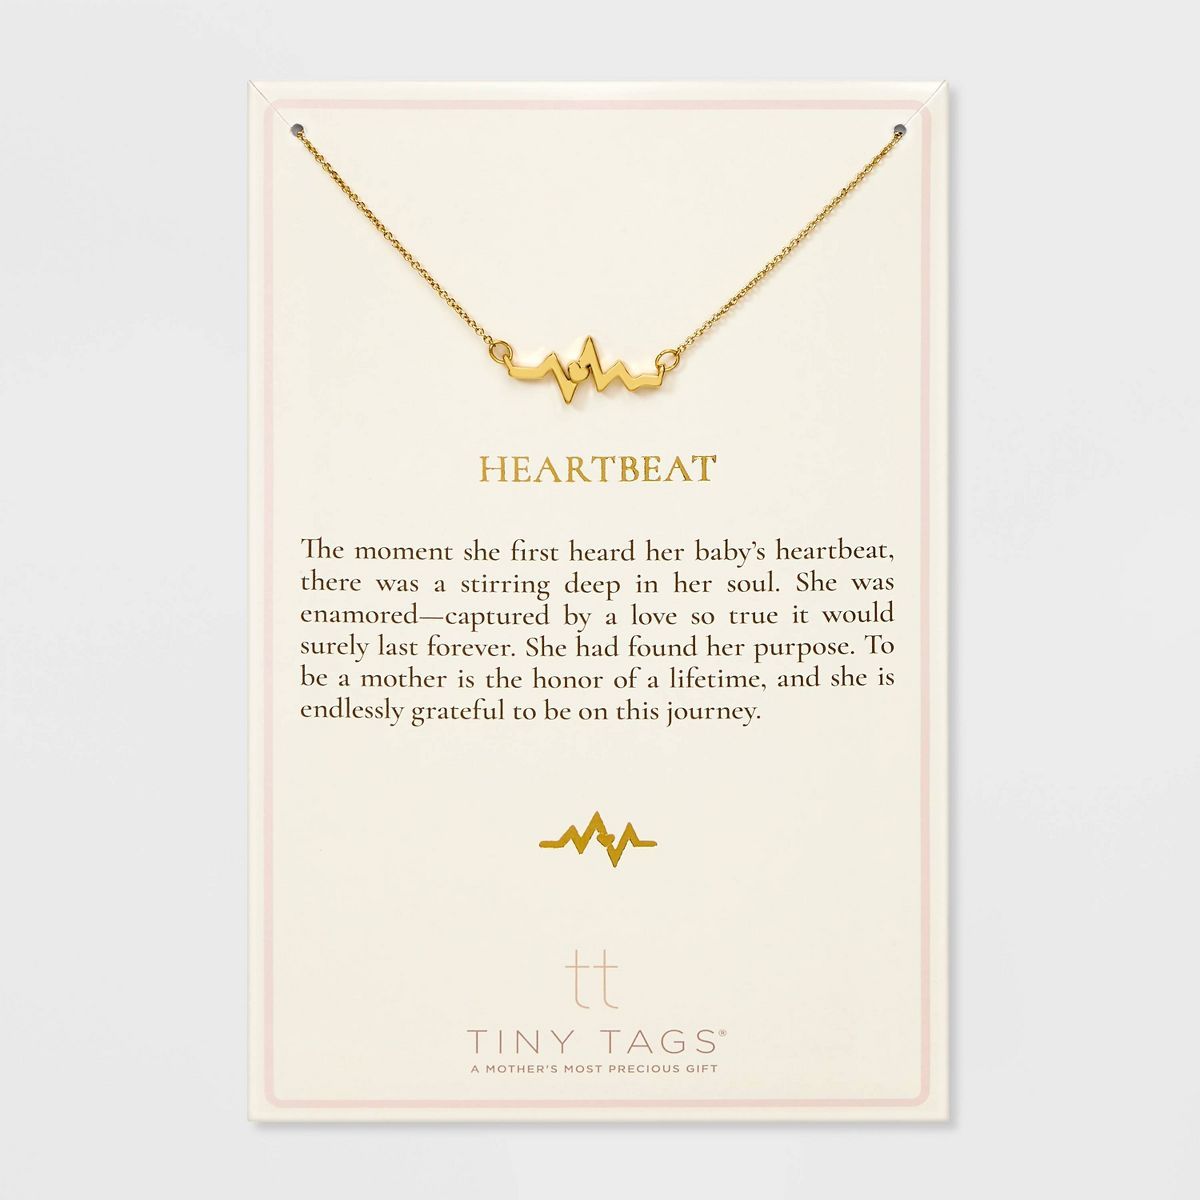 Tiny Tags 14K Gold Ion Plated Heartbeat Chain Necklace - Gold | Target